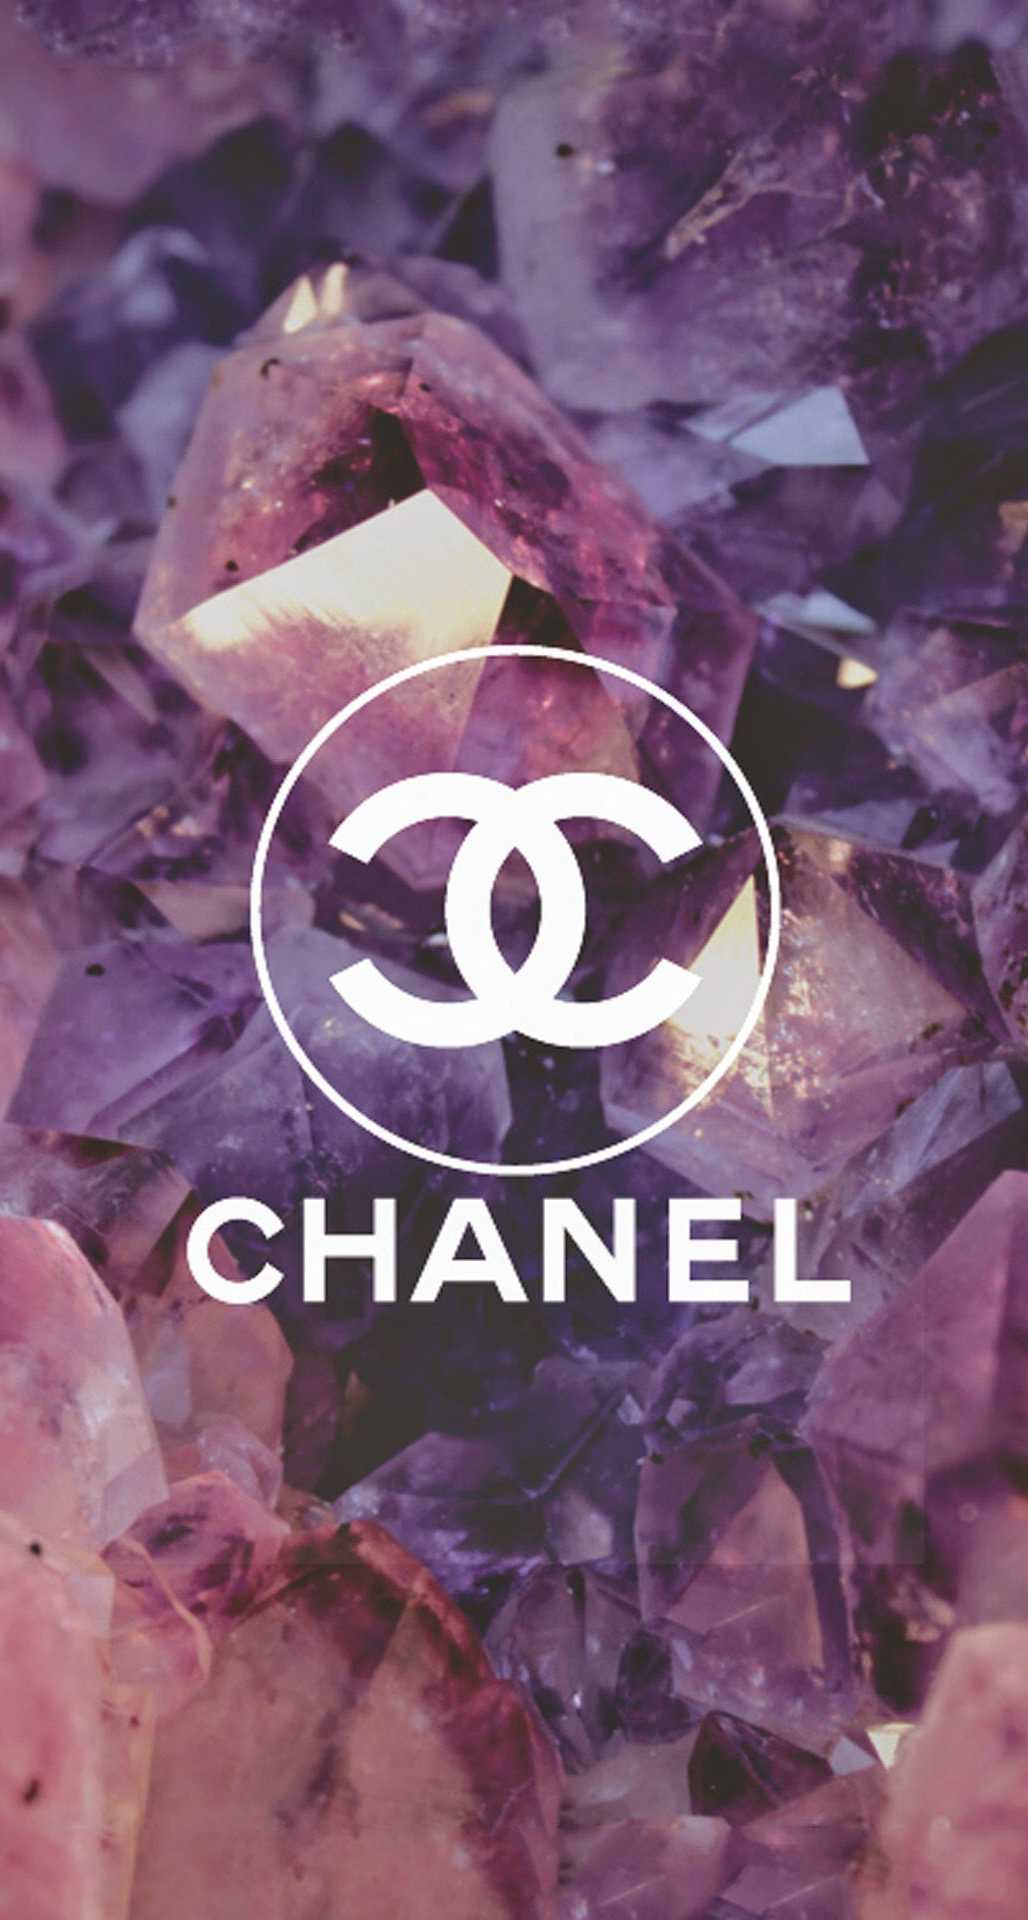 Chanel Iphone Wallpapers Full Hd Pics Desktop Green Hat Of Mobile